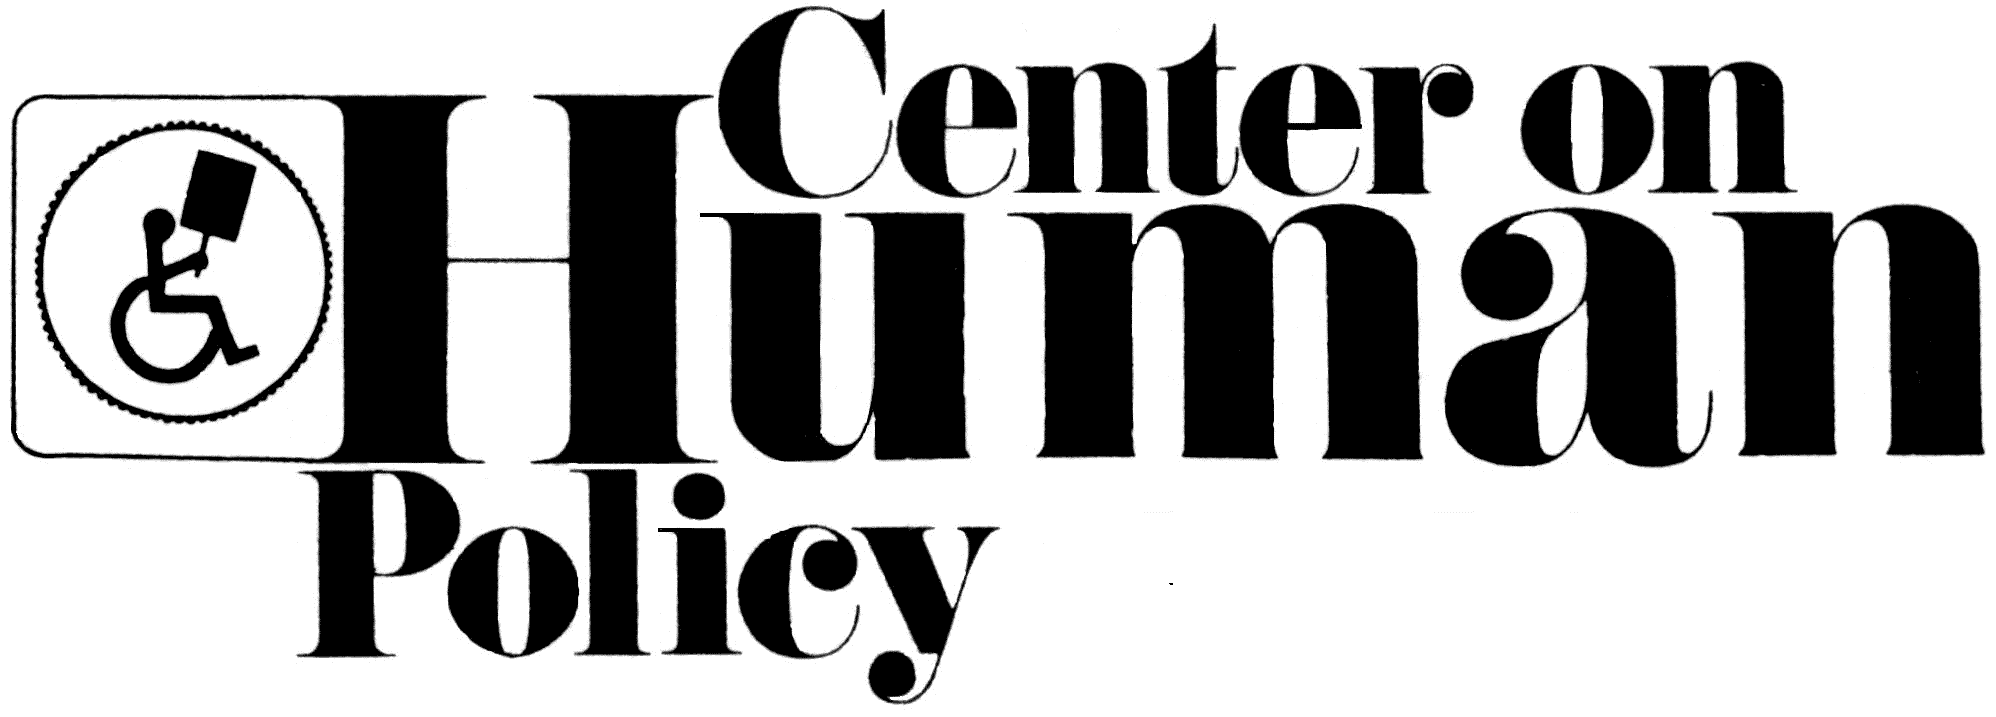 Center on Human Policy